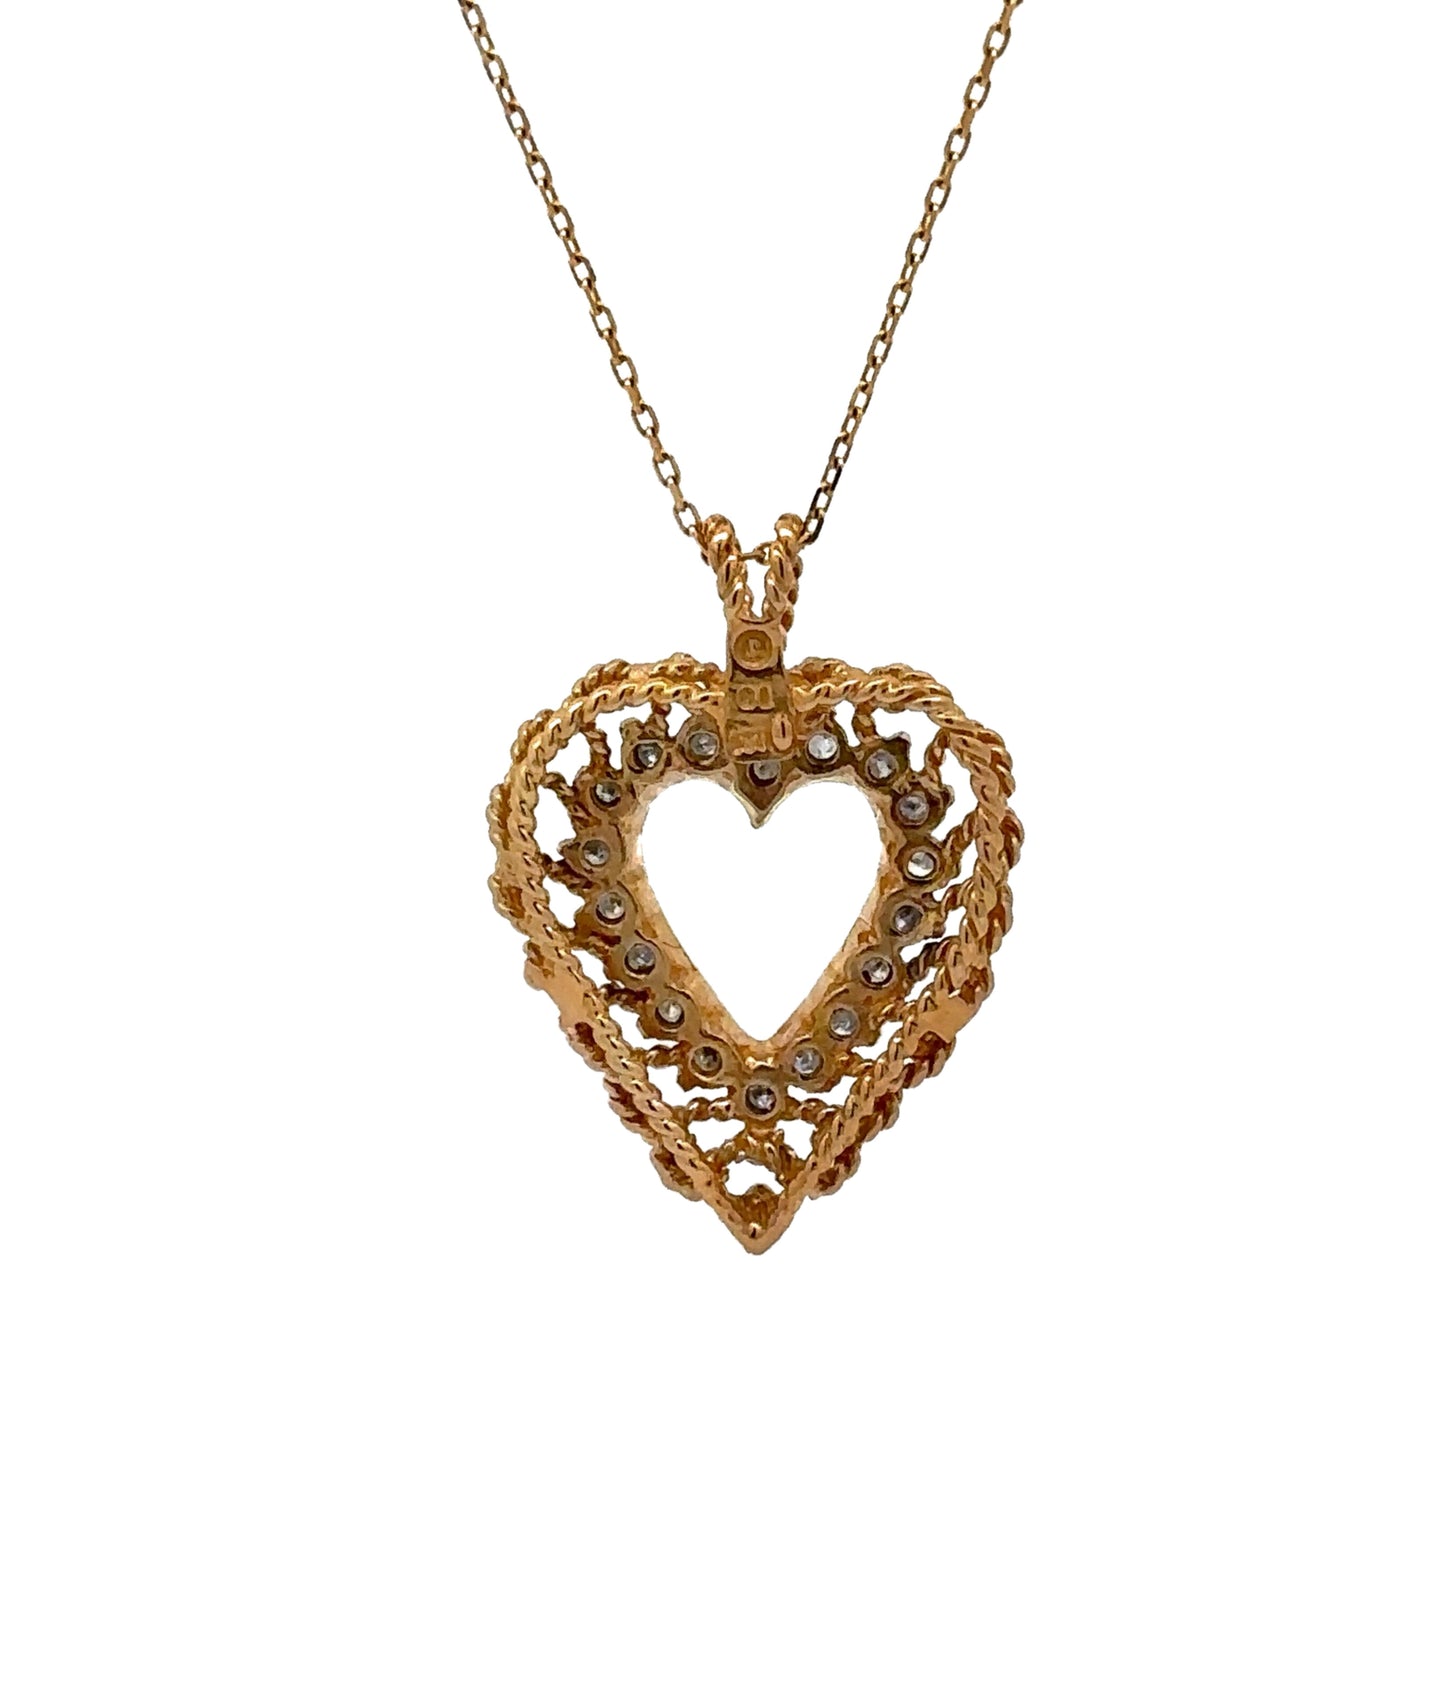 back of necklace with gold detailing around heart